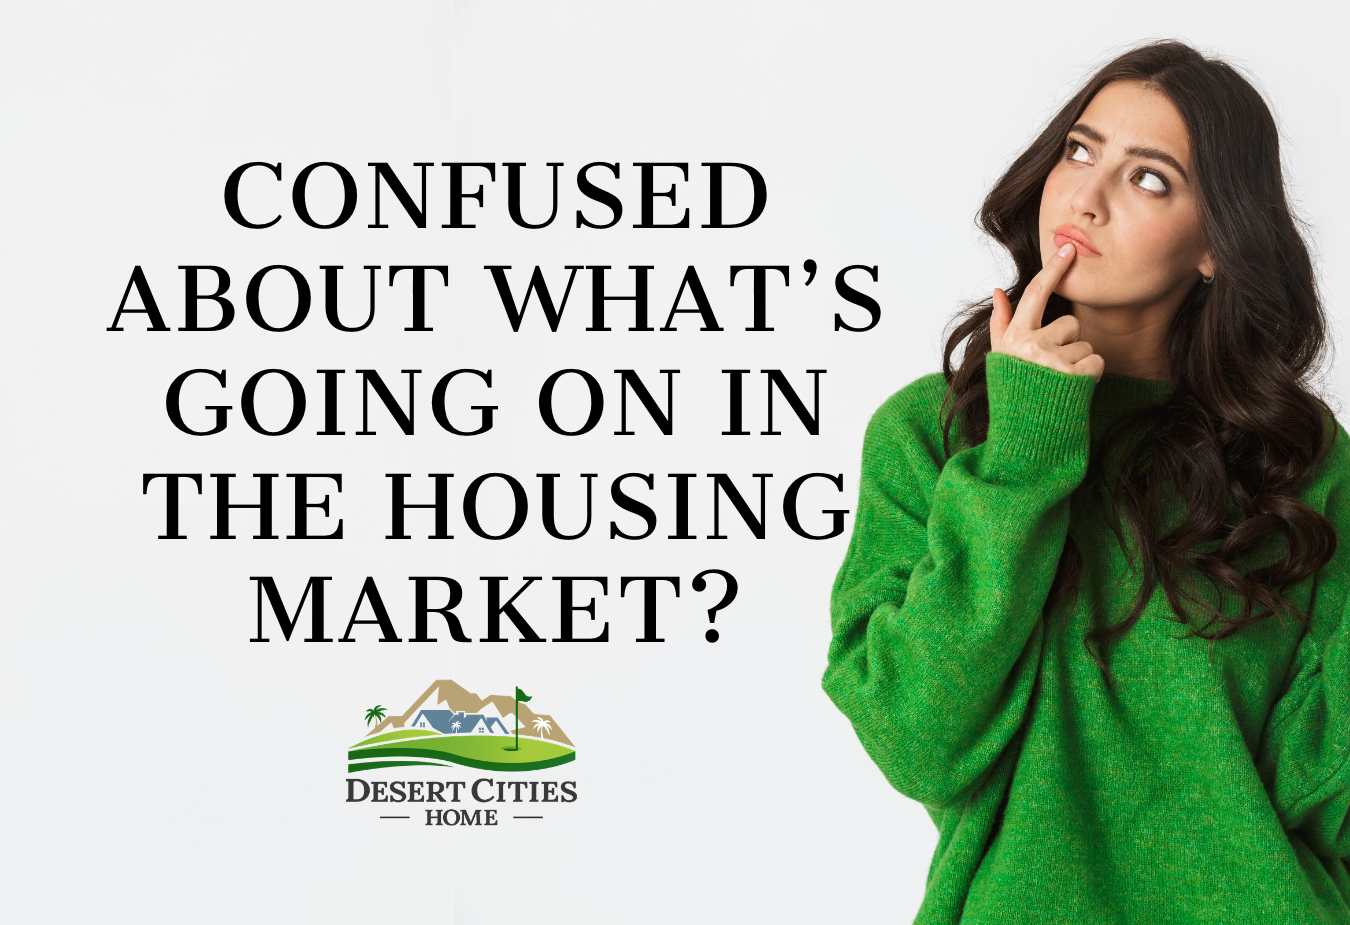 Confused About What’s Going on in the Housing Market?